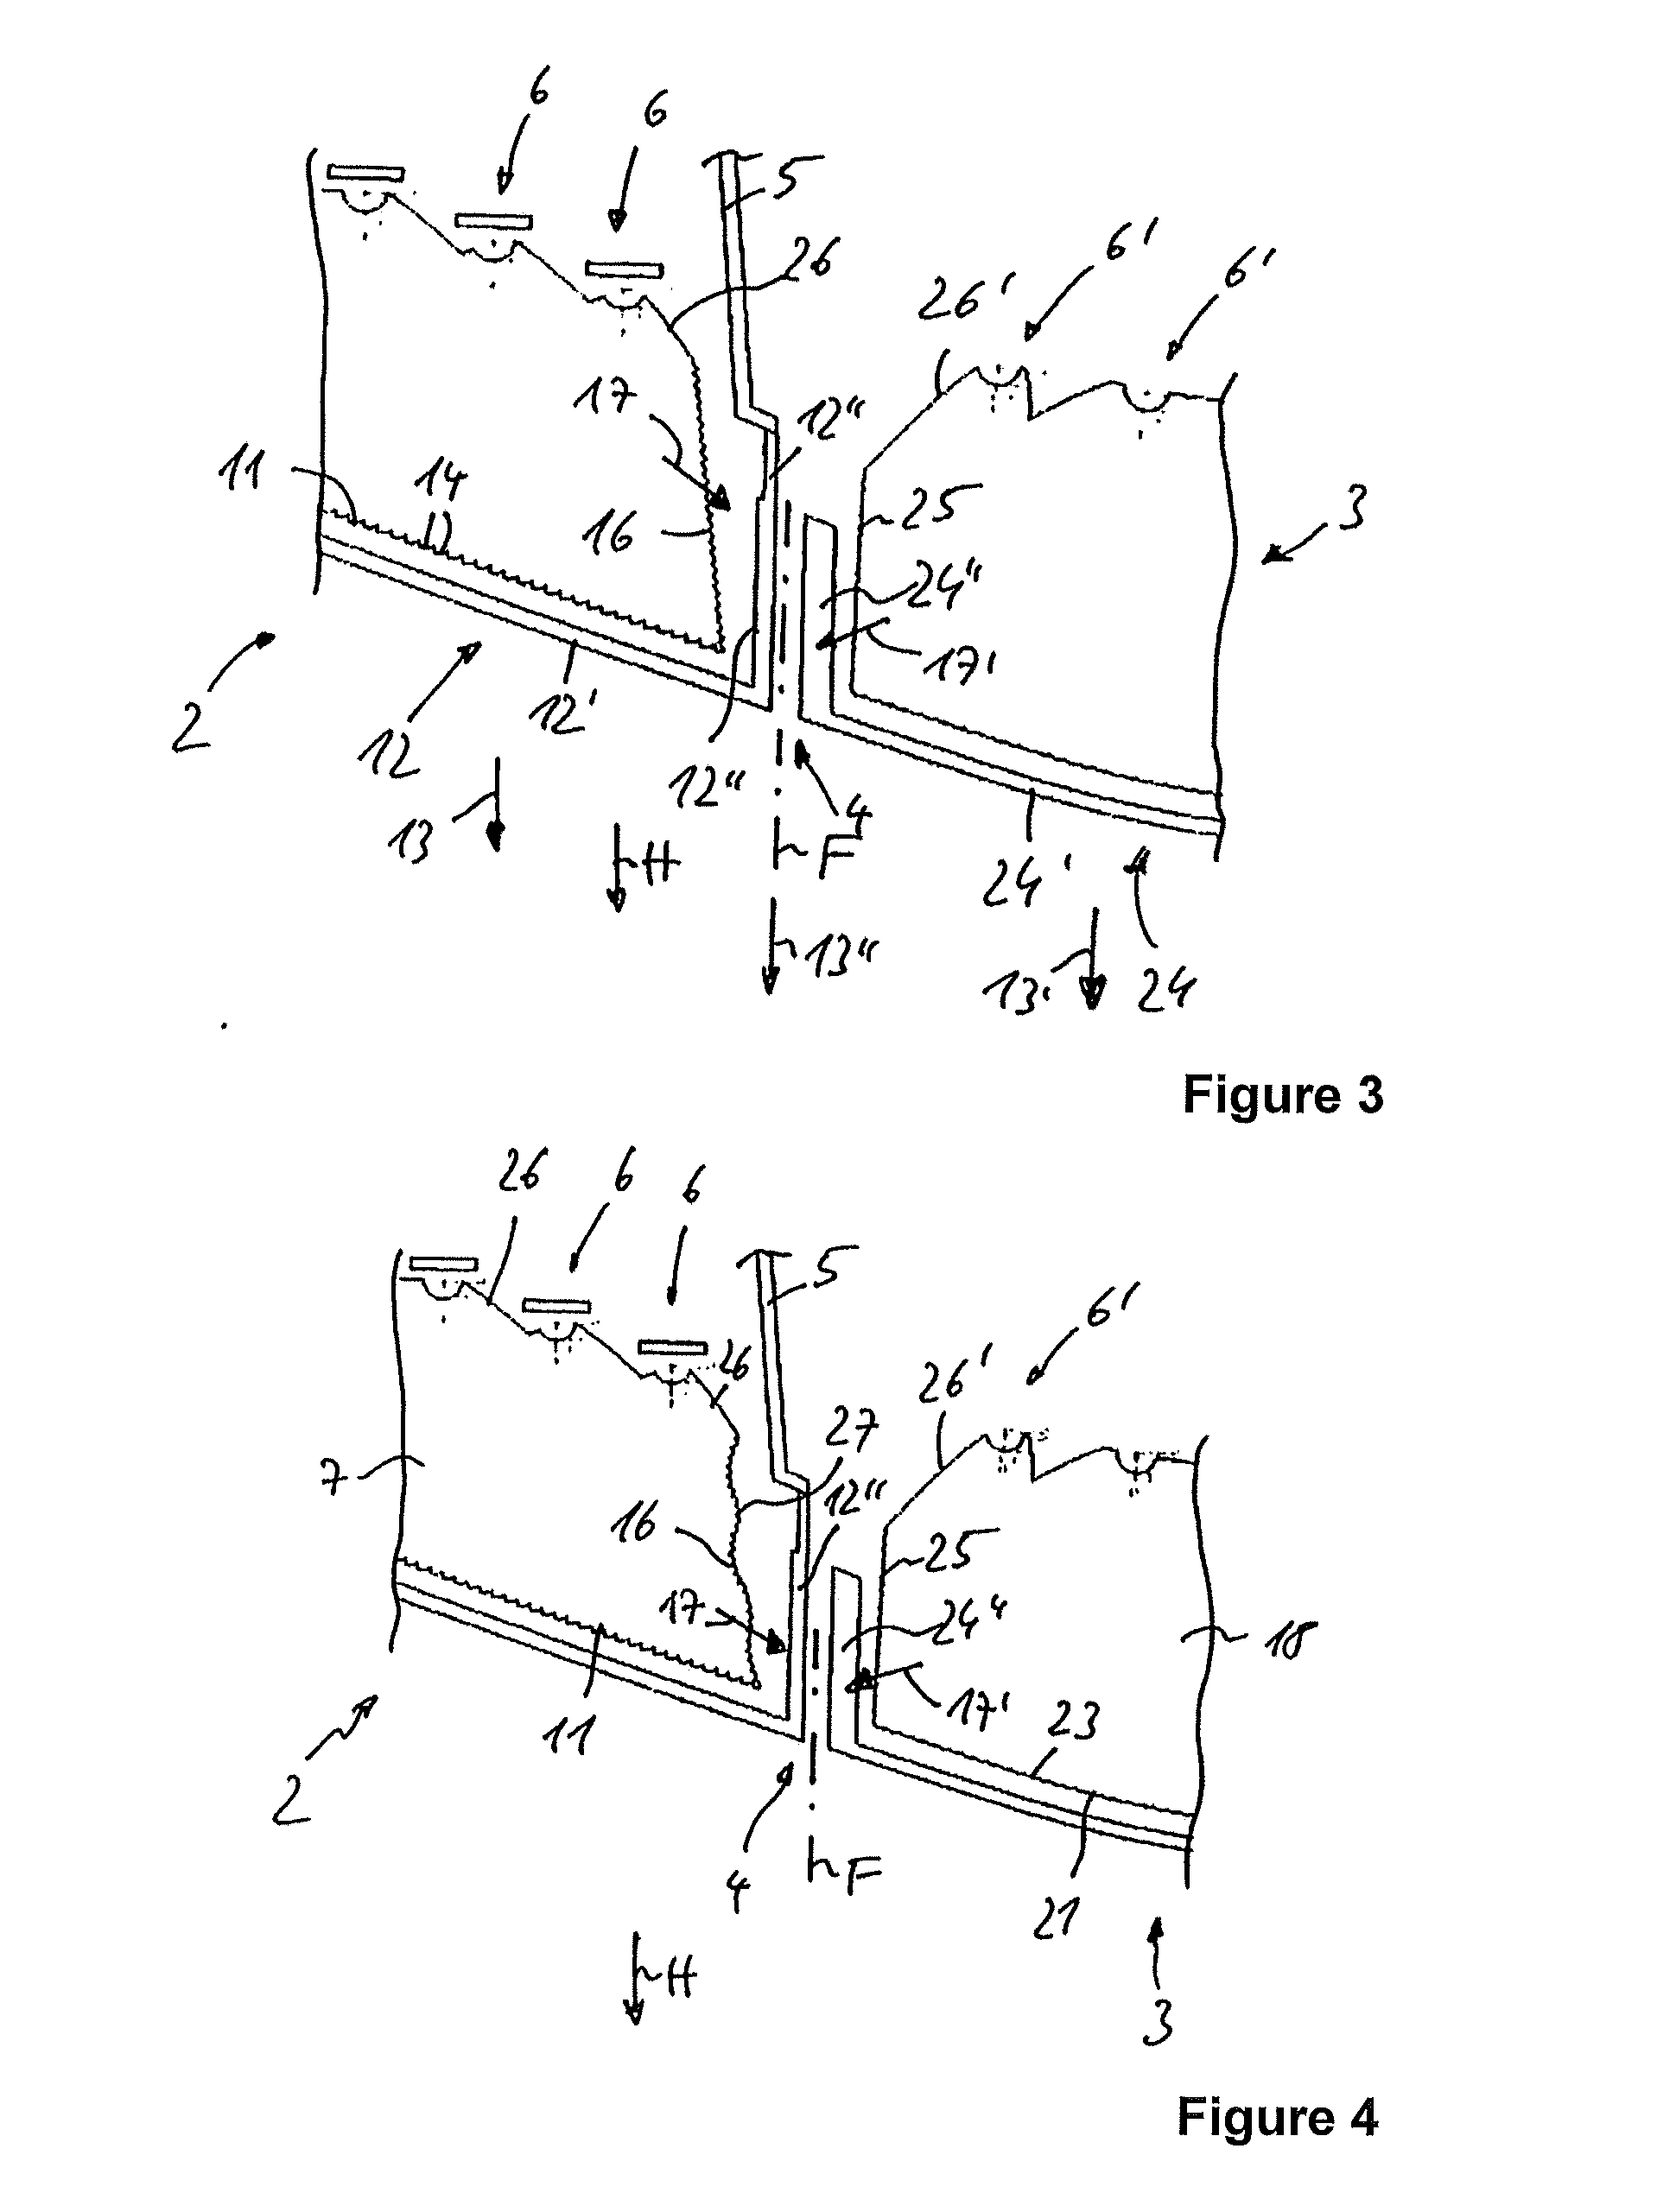 Lighting device for vehicles